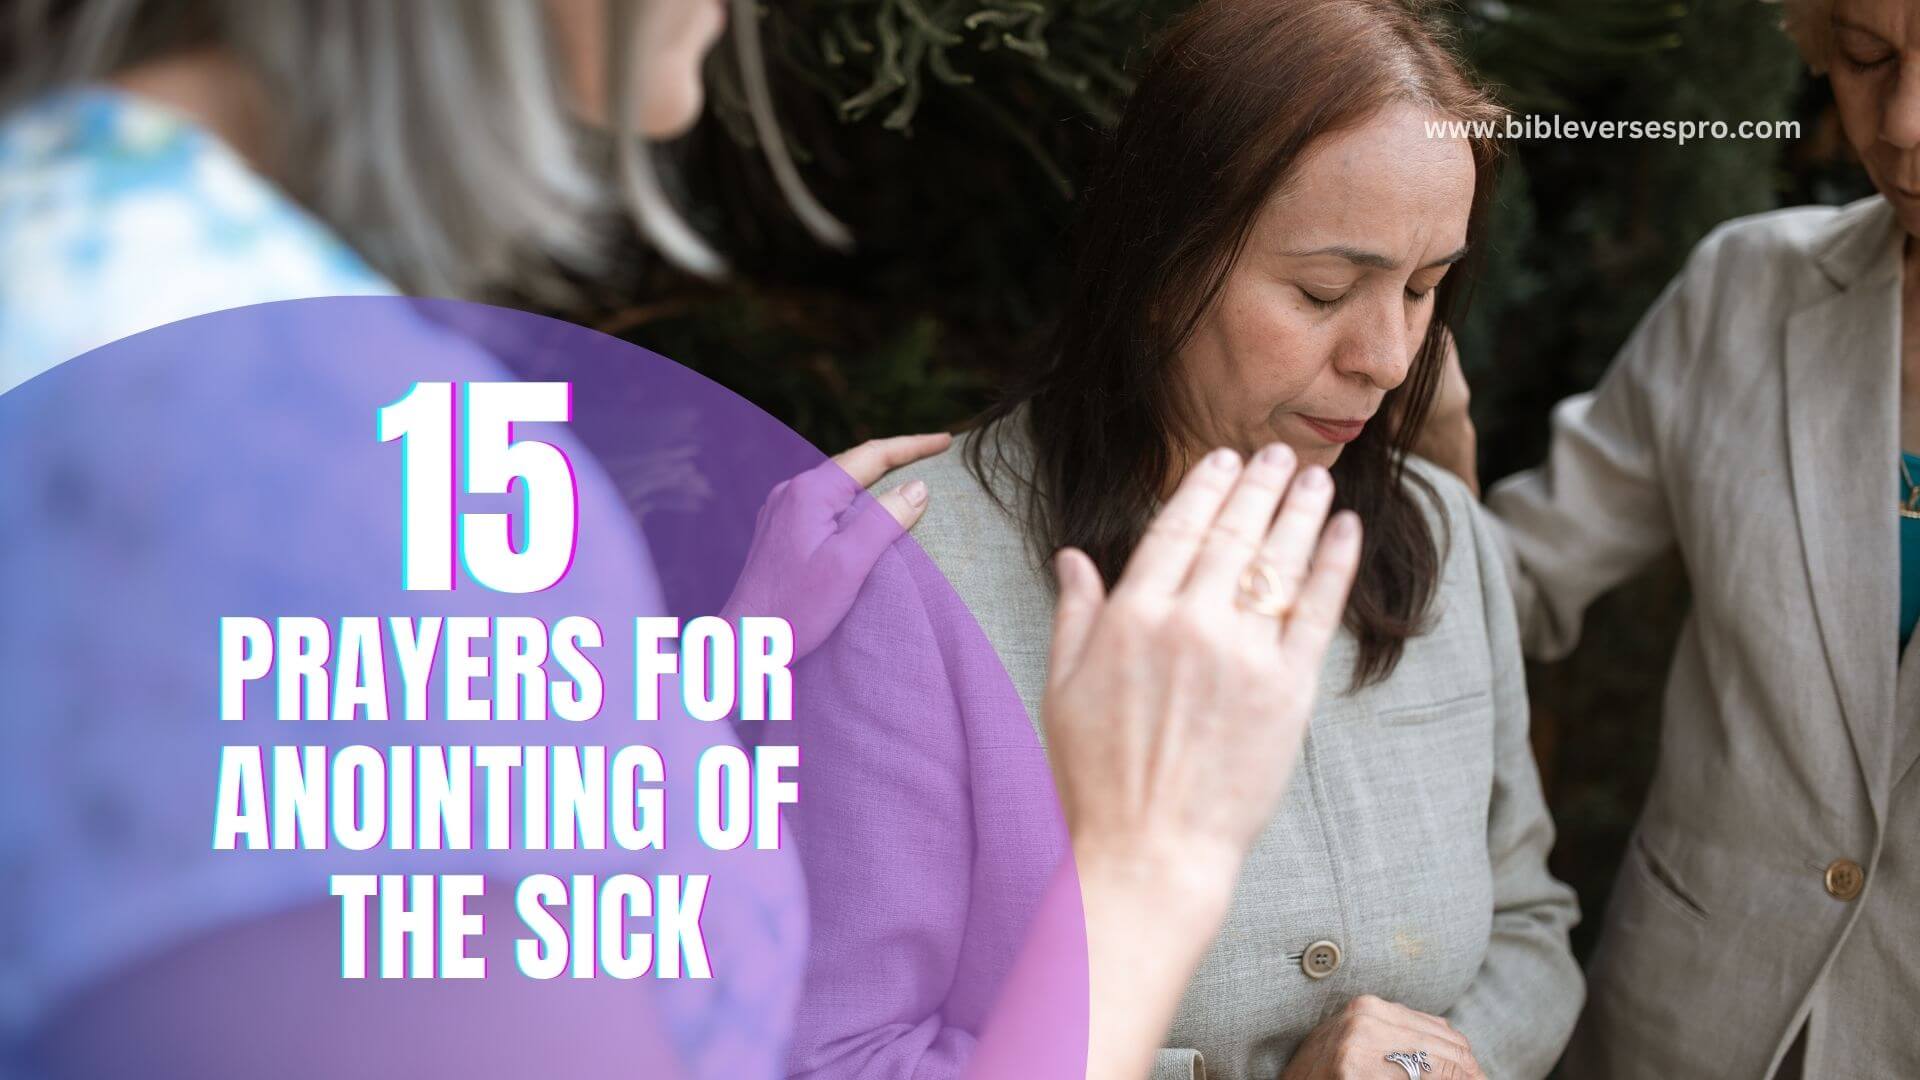 Prayers for Anointing of the Sick